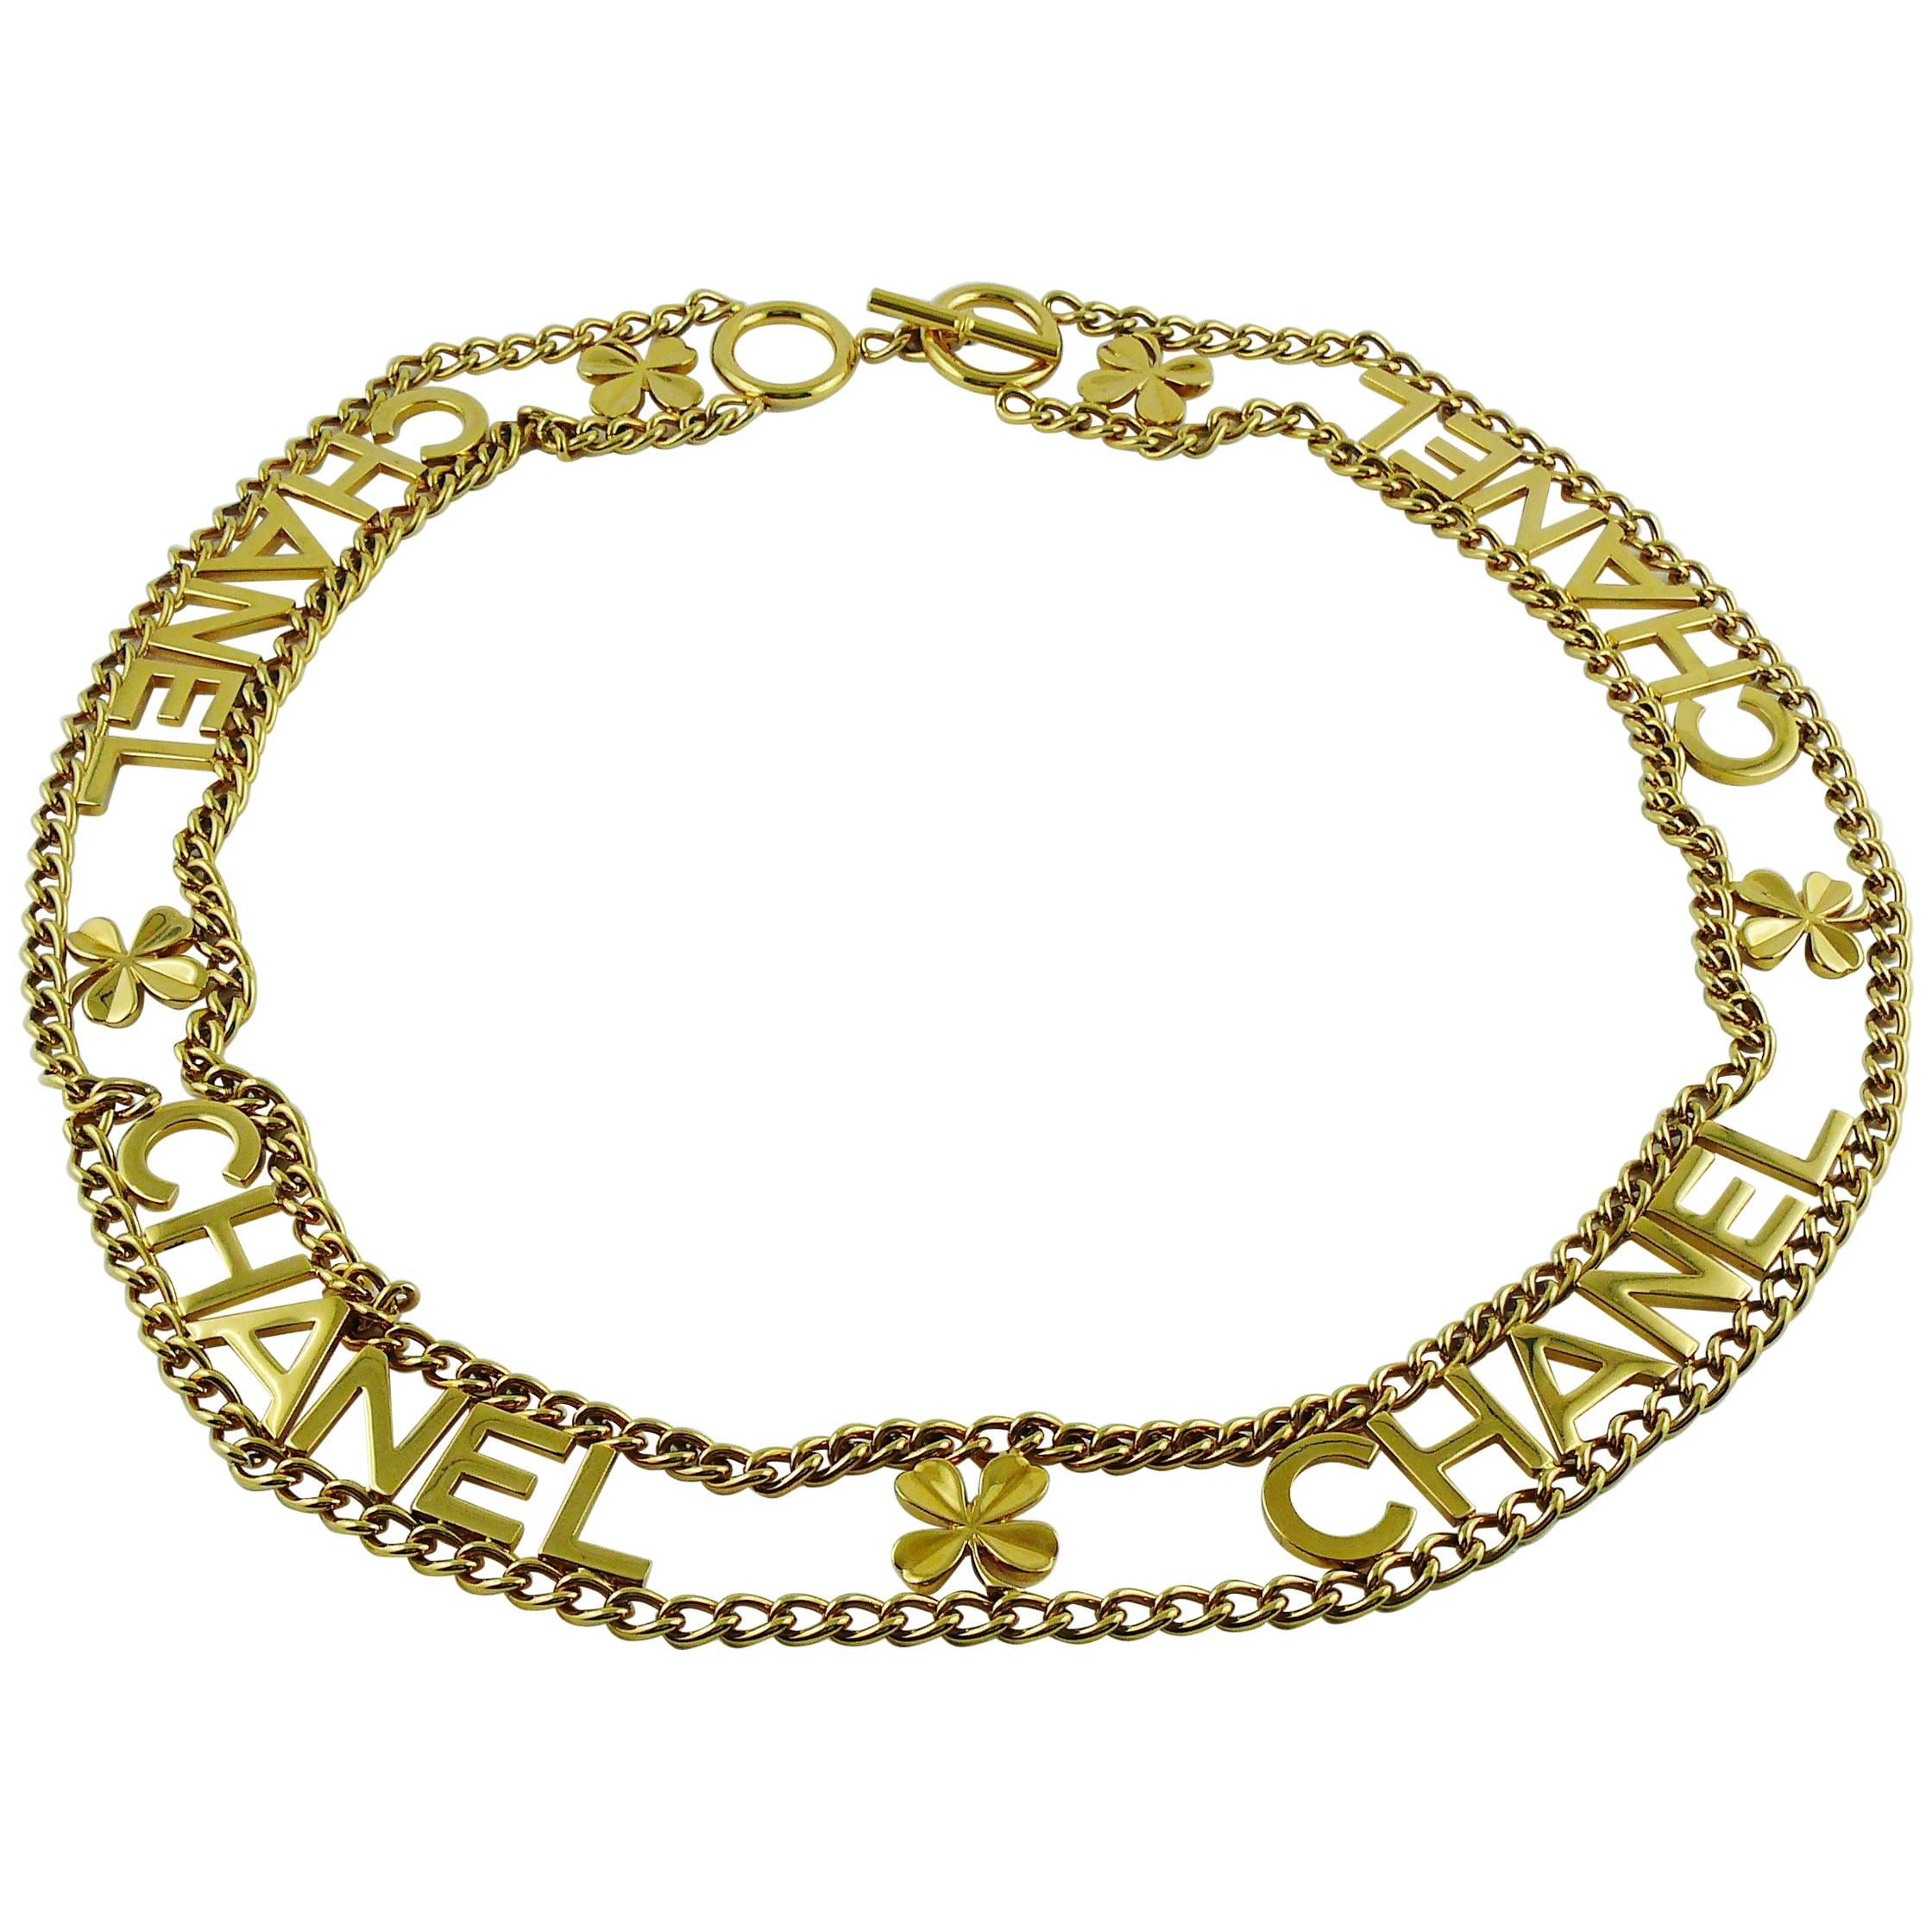 Chanel Vintage Gold Toned Chain Belt with Chanel Letters and Clovers, 1998 